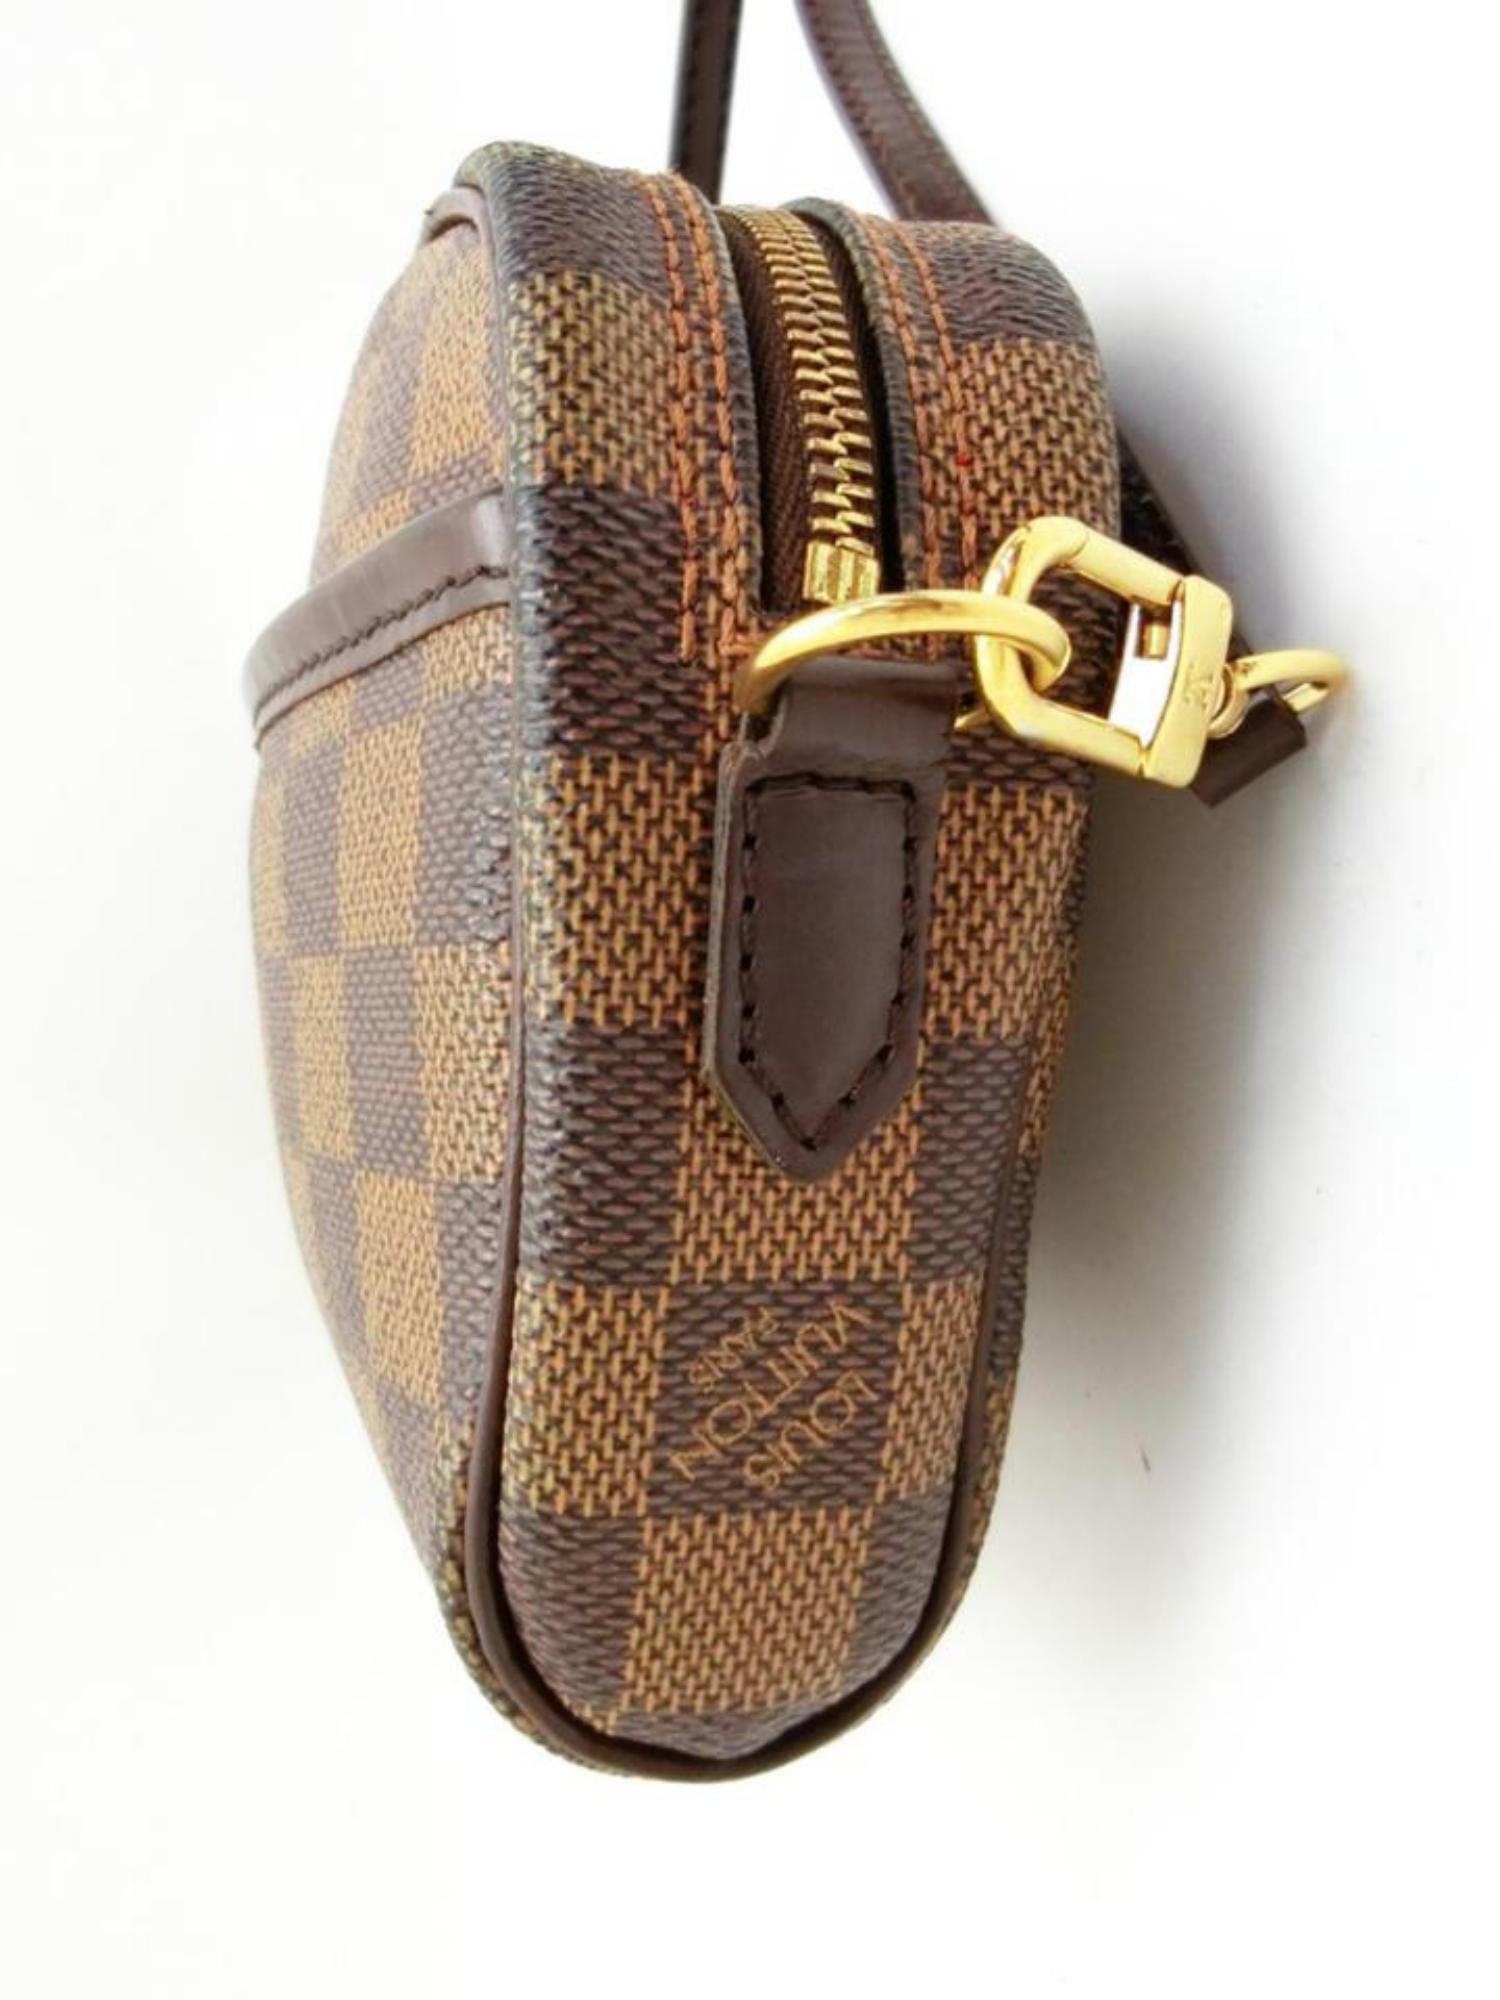 Louis Vuitton Ipanema Pochette Damier Ebene Fanny Pack 3way 231182 Brown Coated  In Good Condition For Sale In Forest Hills, NY